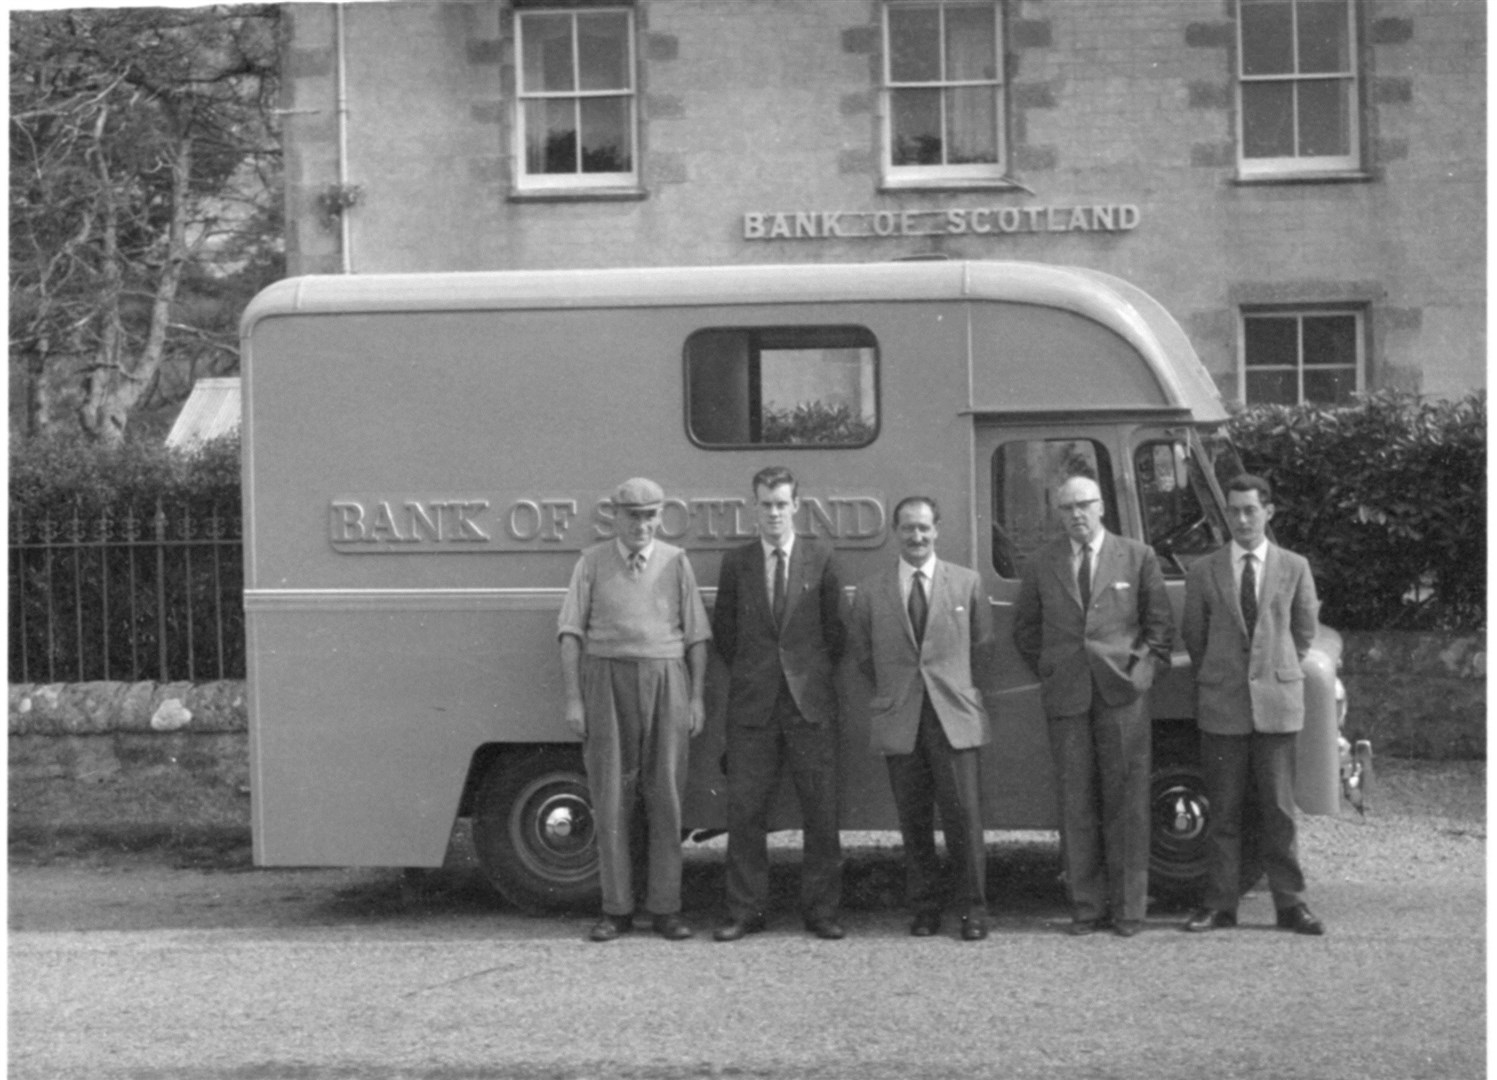 Bank of Scotland van, with Donnie Fraser, Calum Buchanan, Hugh Munro, Calum Macdonald, and Neil Mackay. Picture: Gairloch and District Museum.